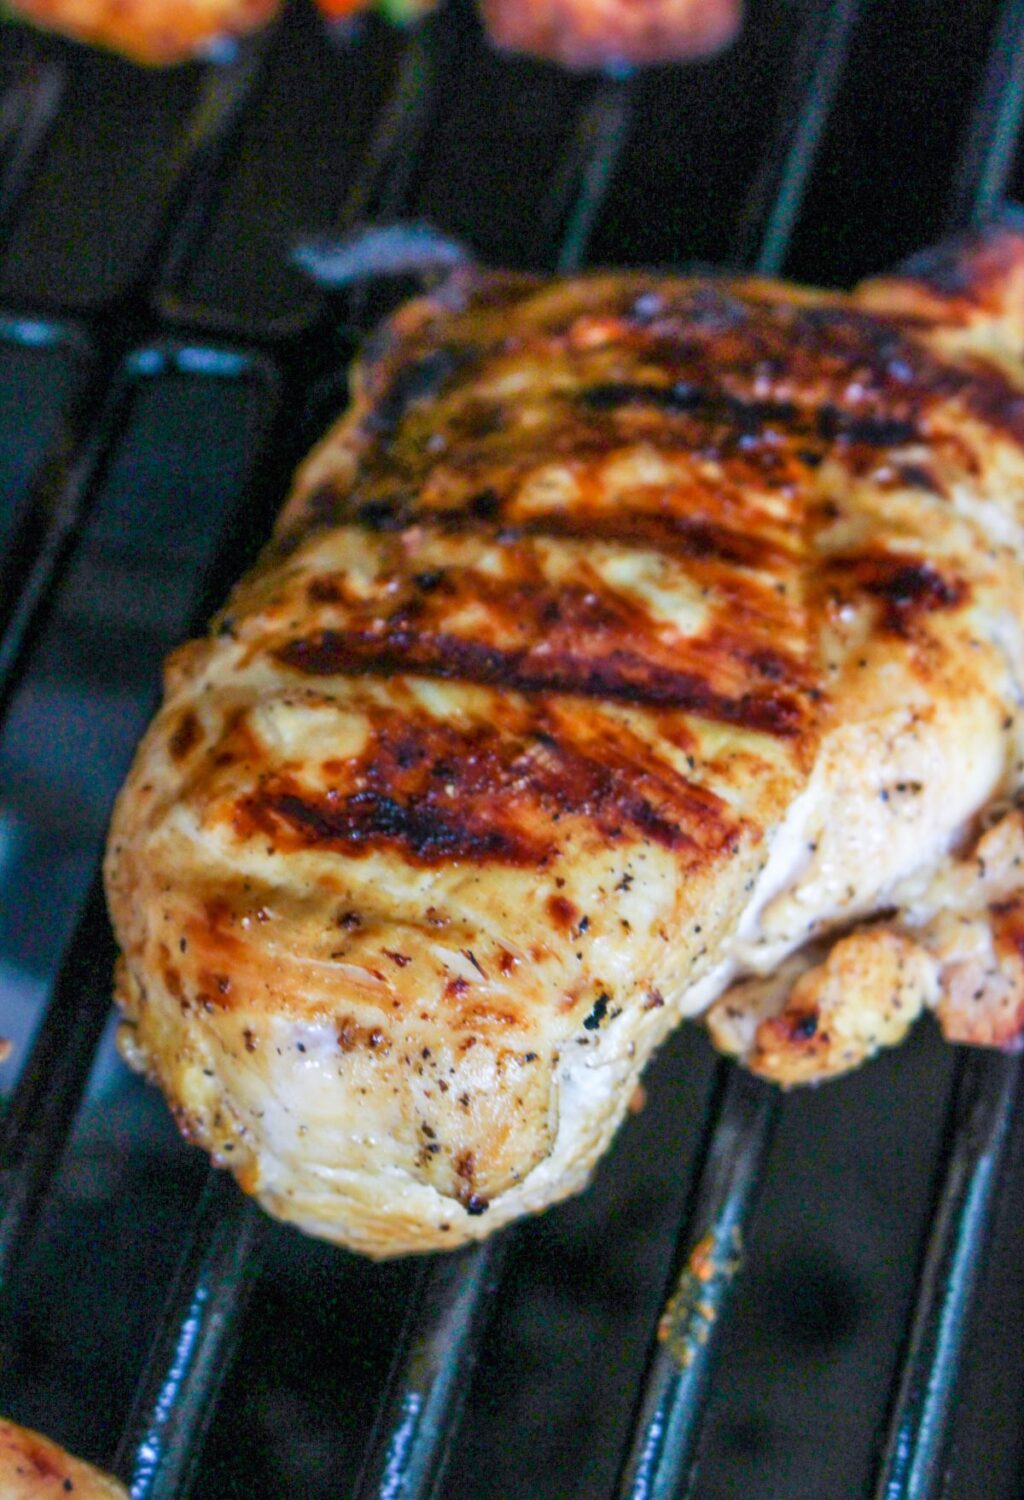 A piece of chicken is being cooked on a grill.